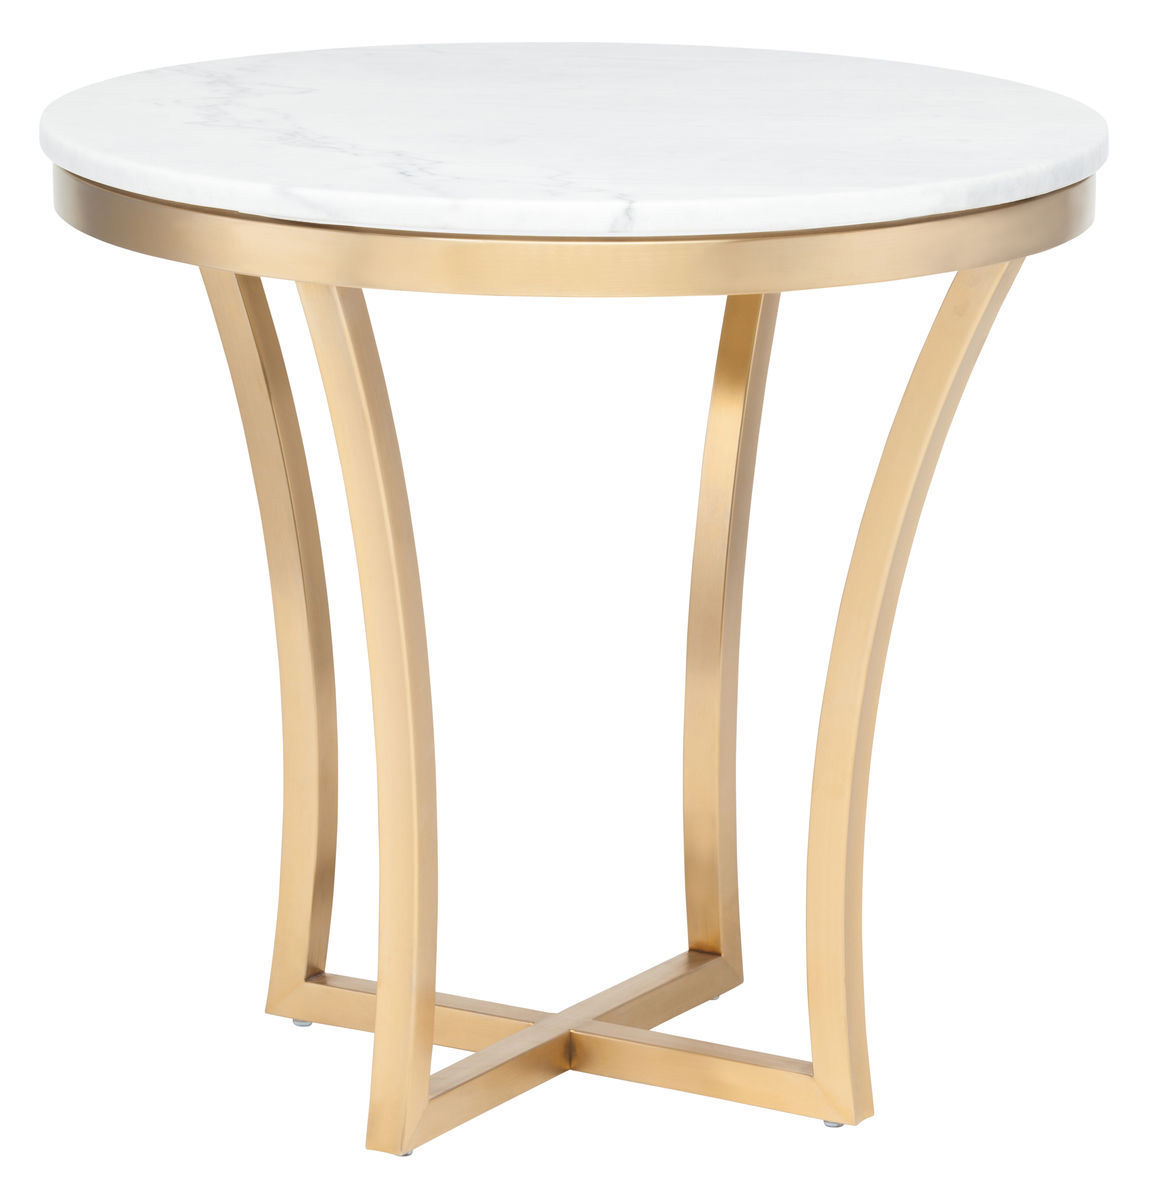 aurora side table white and gold nuevo drop leaf hammered accent patio tile with umbrella hole bedroom decor ideas west elm carpets contemporary dining chairs formal magazine deep